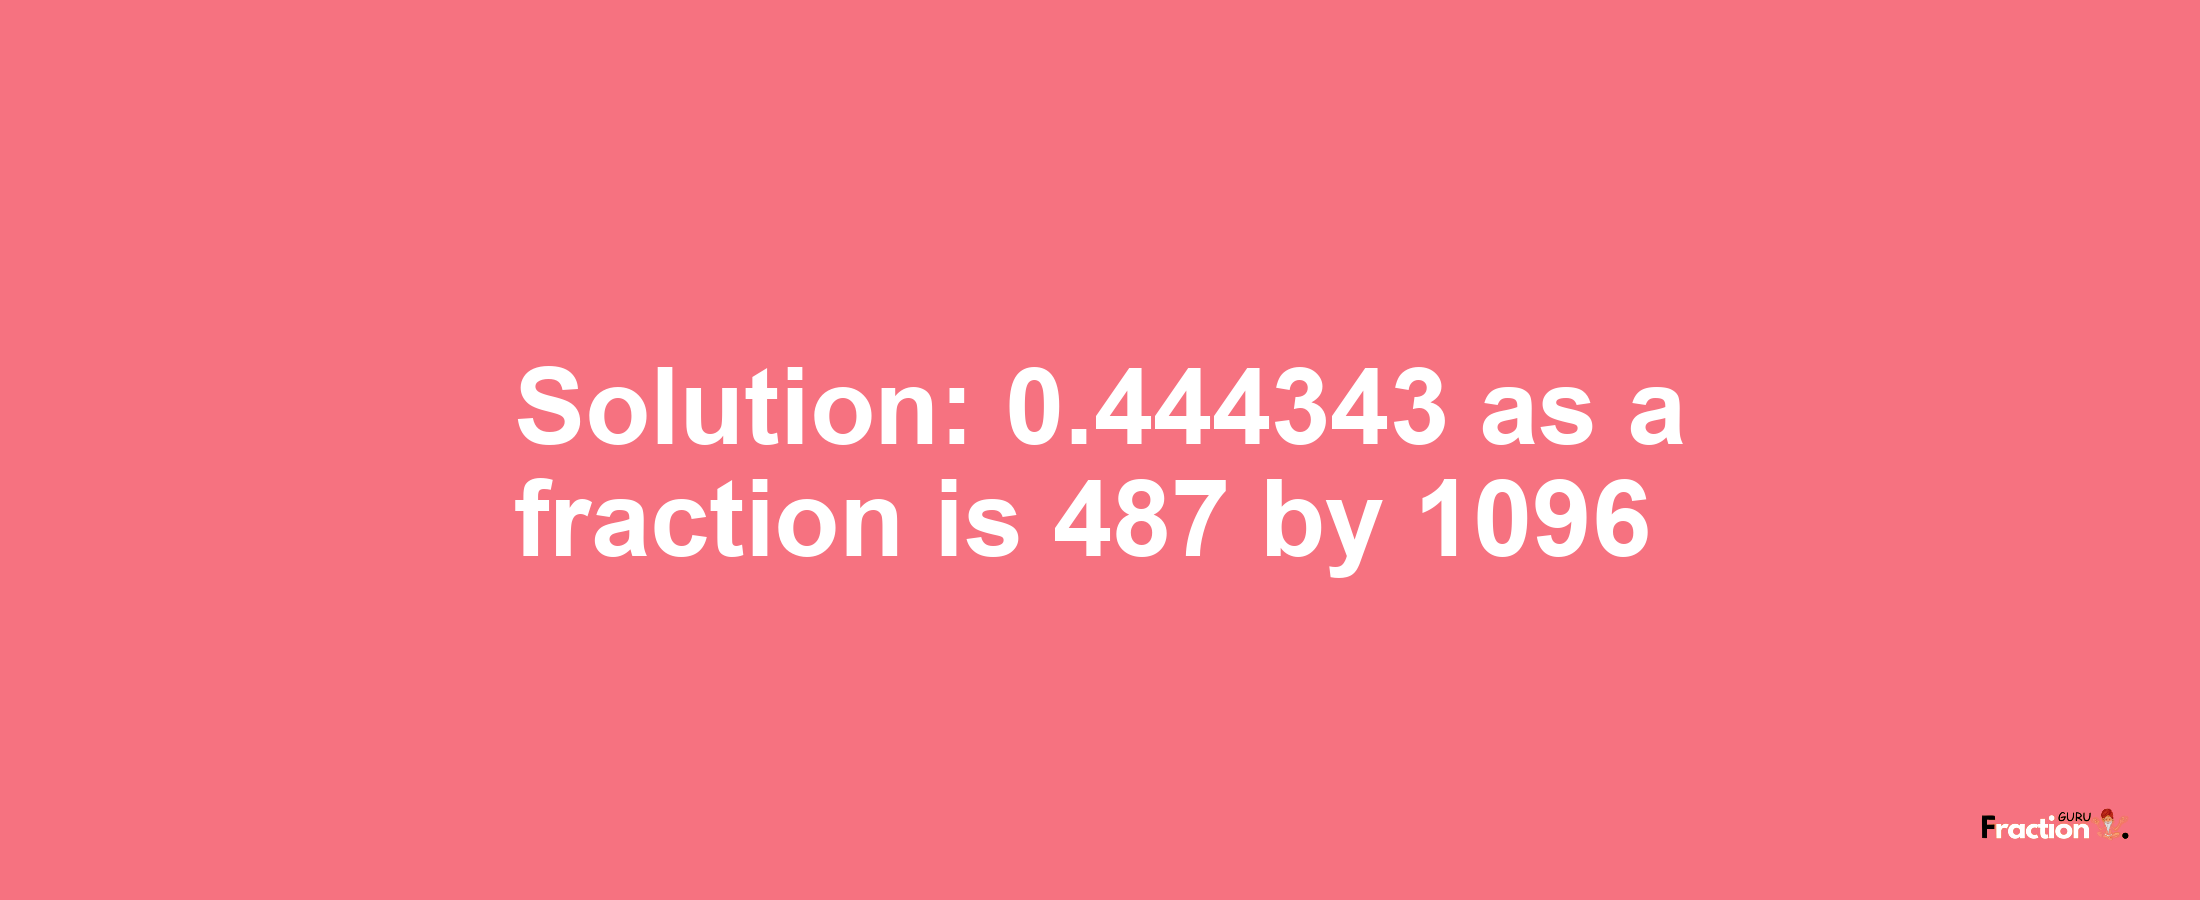 Solution:0.444343 as a fraction is 487/1096